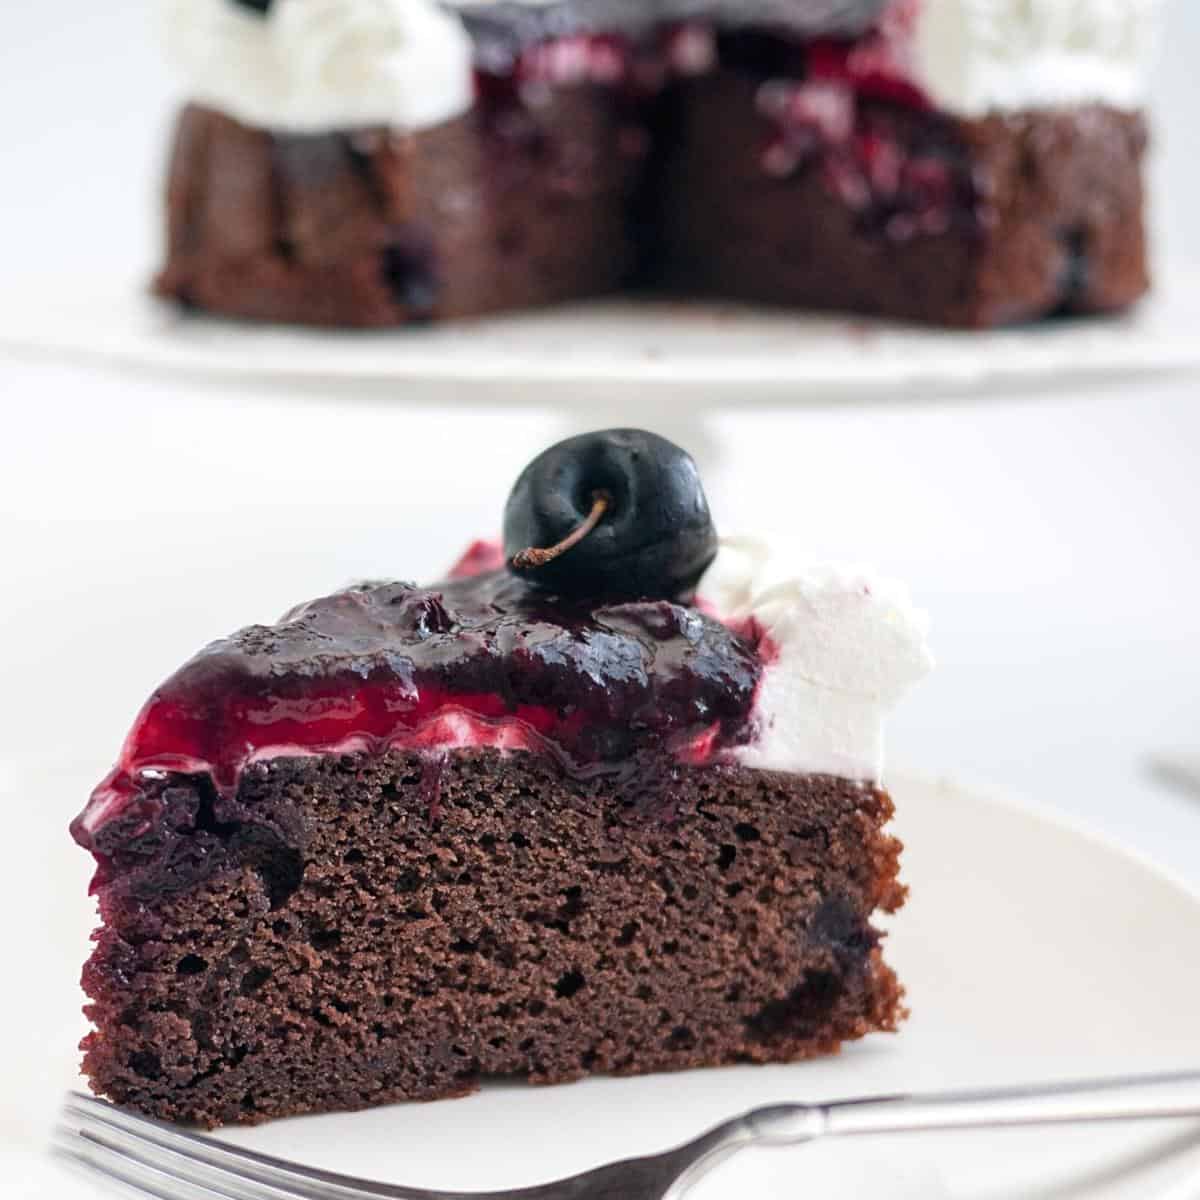 A slice of chocolate cake with cherries filling.